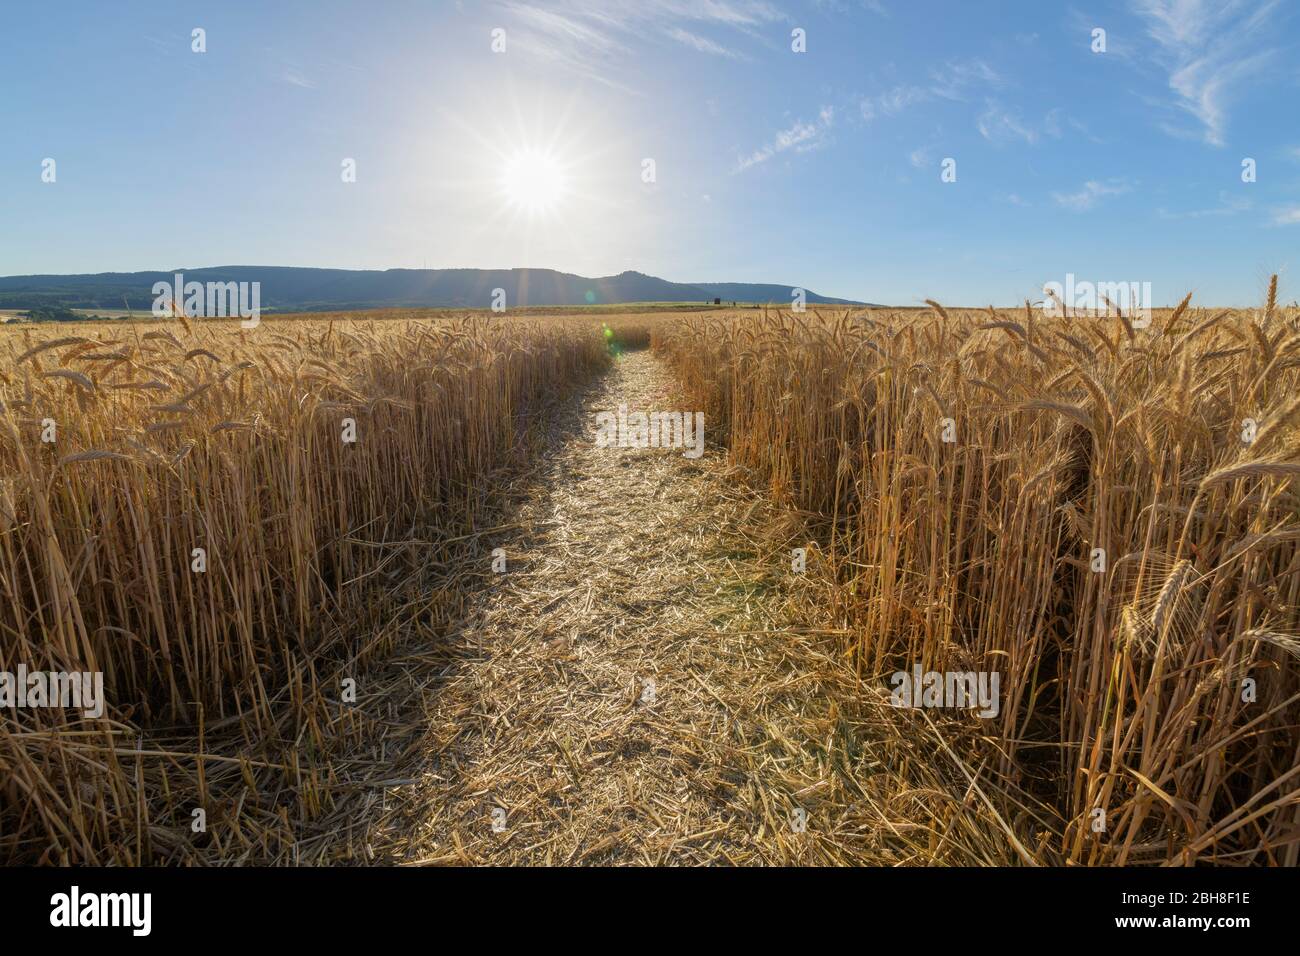 Path through grainfield with sun, Germerode, Werra-Meissner district, Hesse, Germany Stock Photo